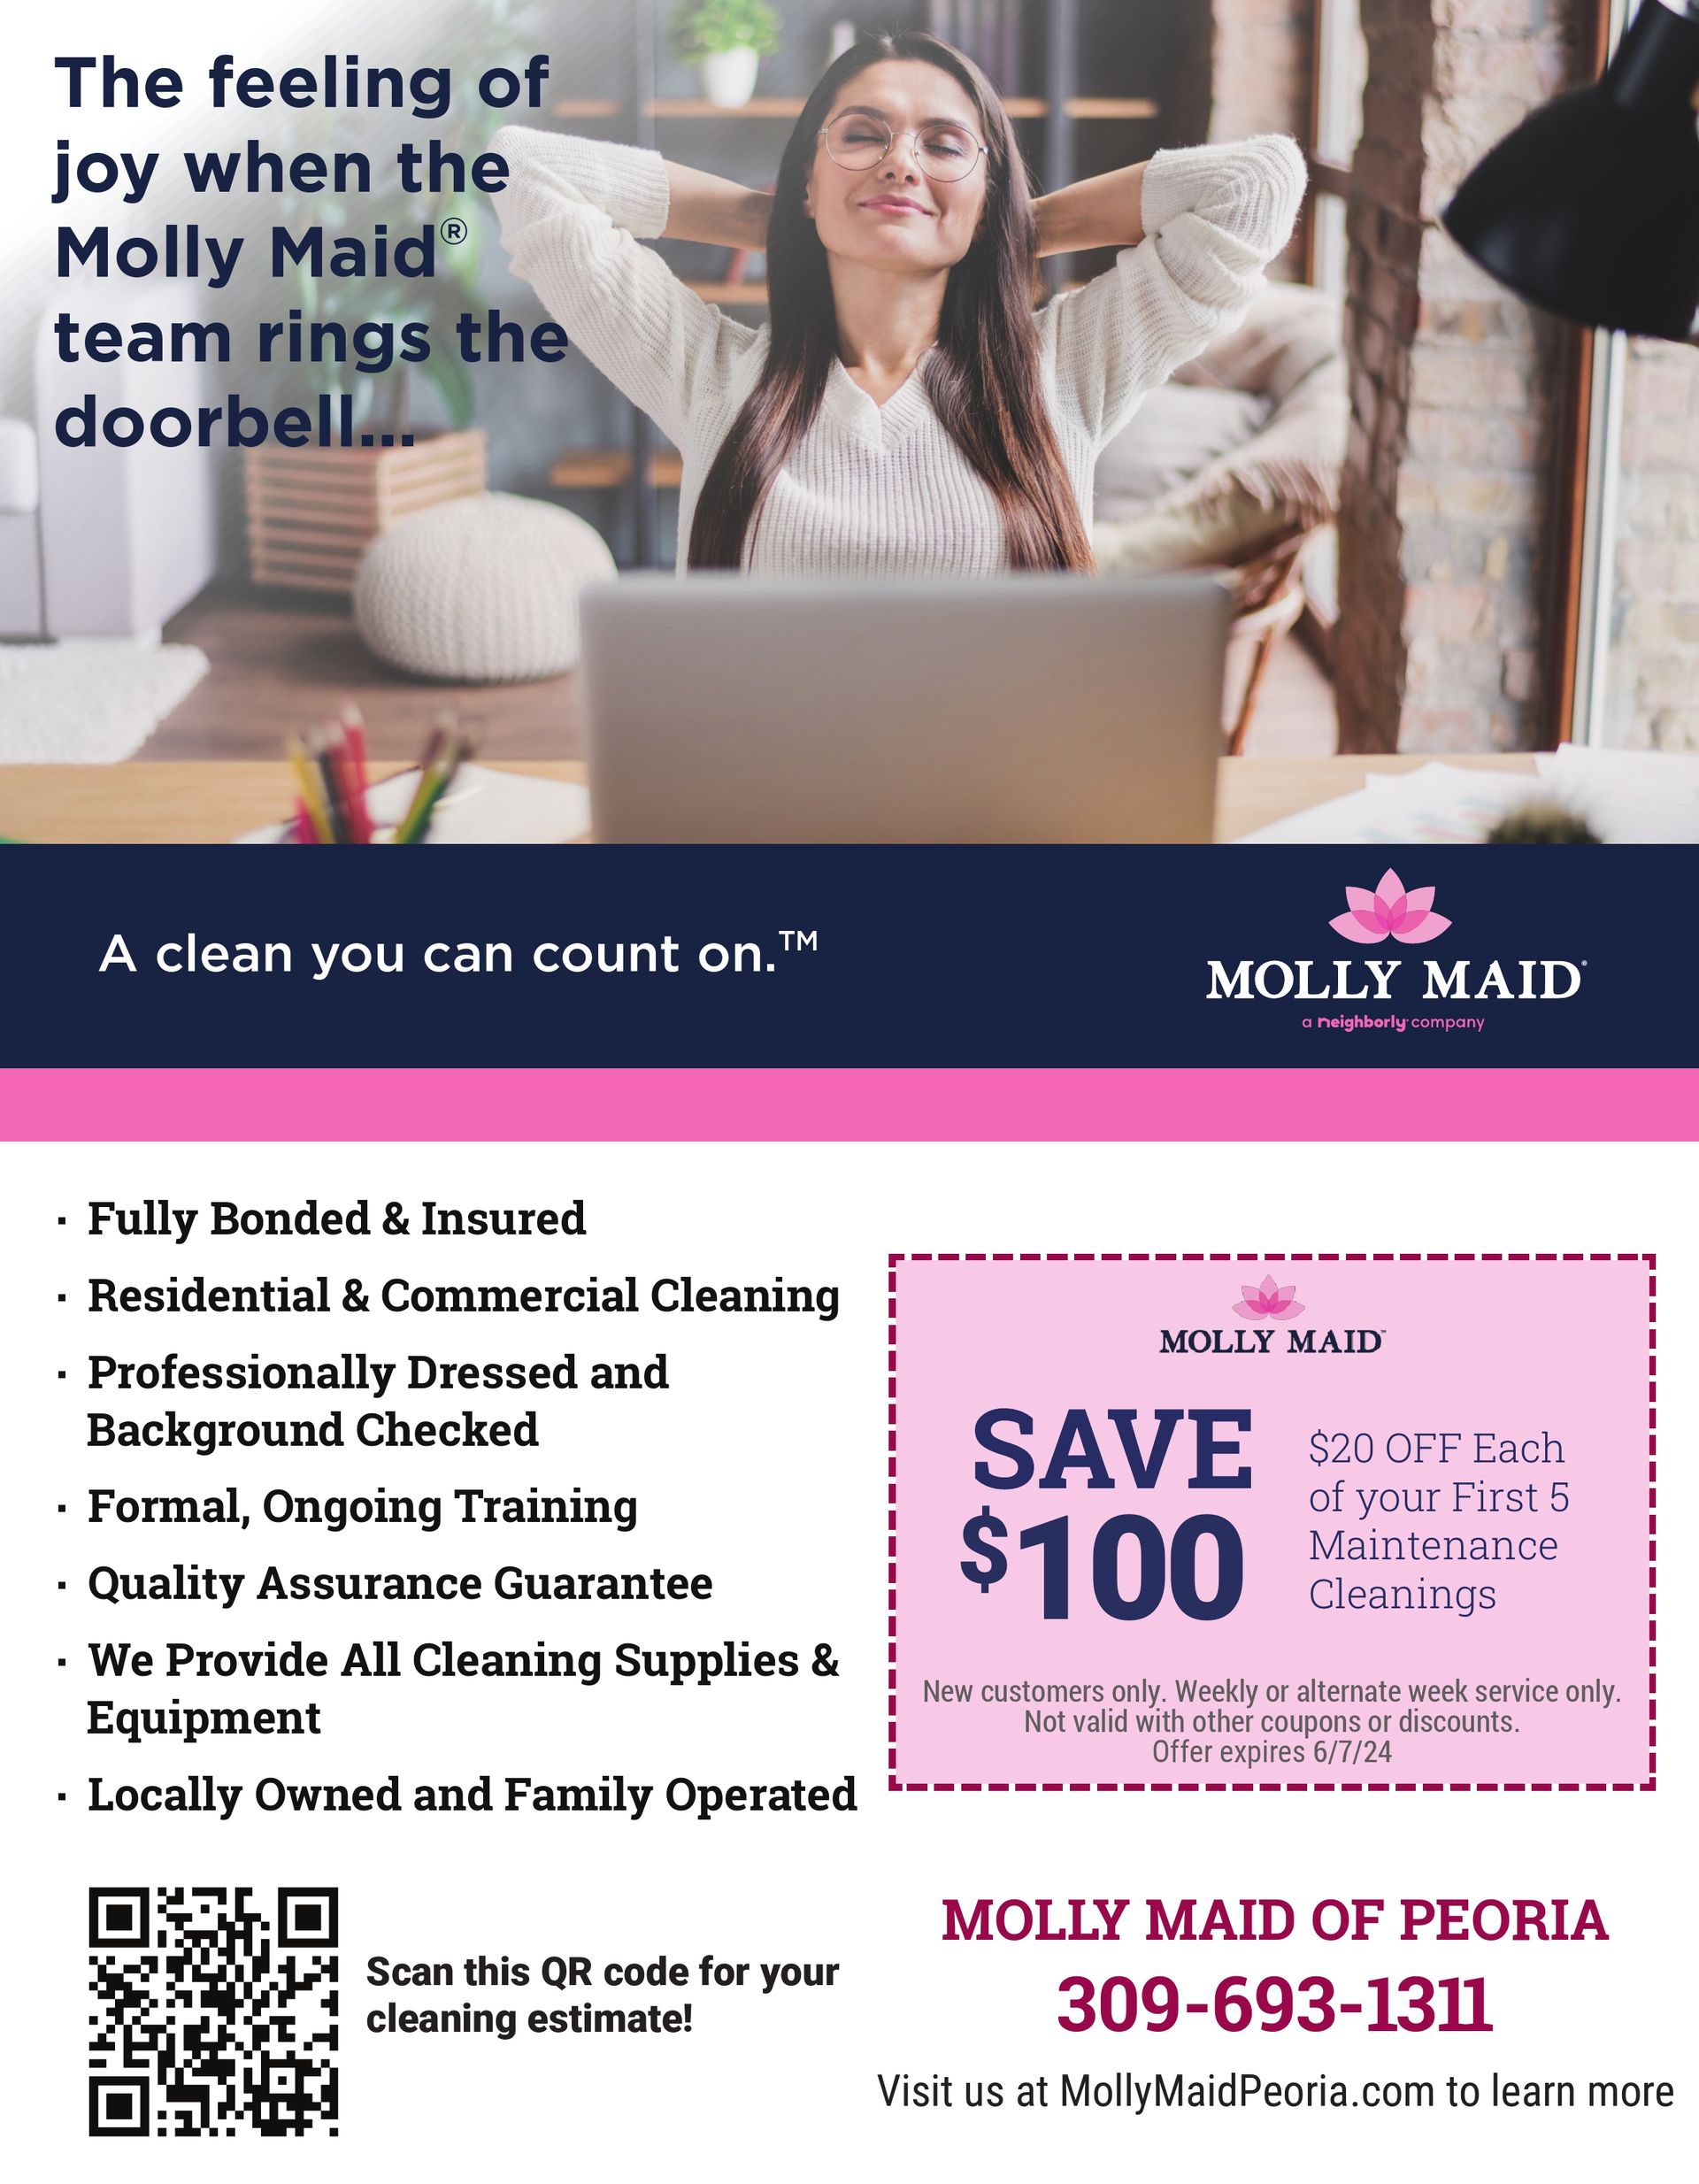 Molly Maid of Peoria, house, home cleaners up to $120 in coupons serving the tri county area Peoria, IL